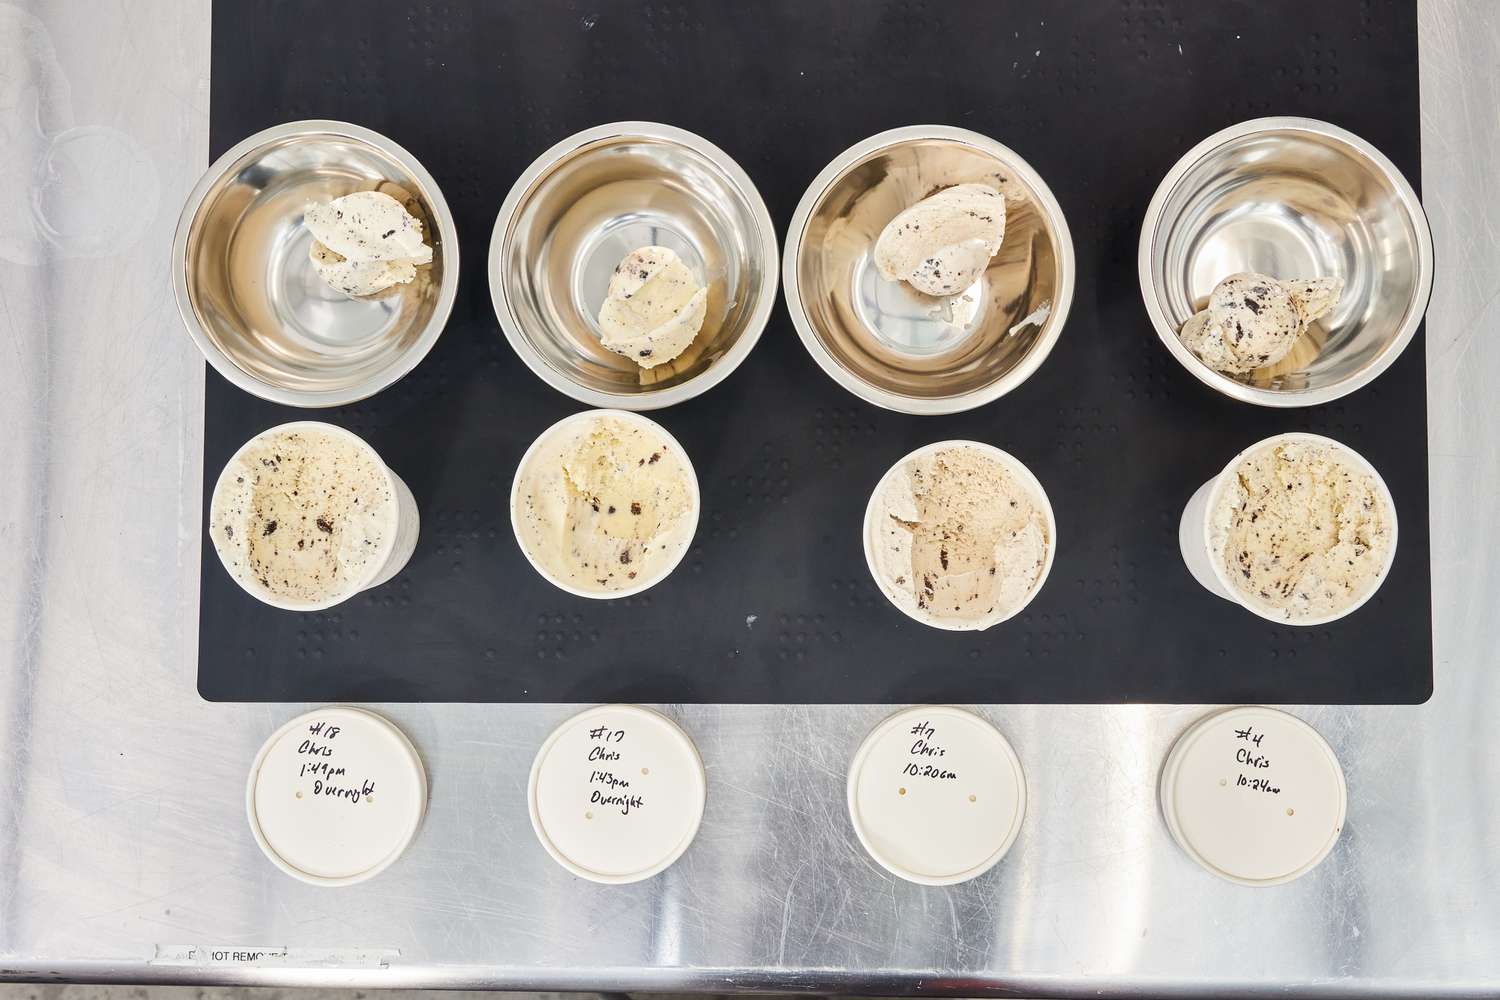 Four different ice creams from different ice cream makers shown scooped from paper containers into bowls. 